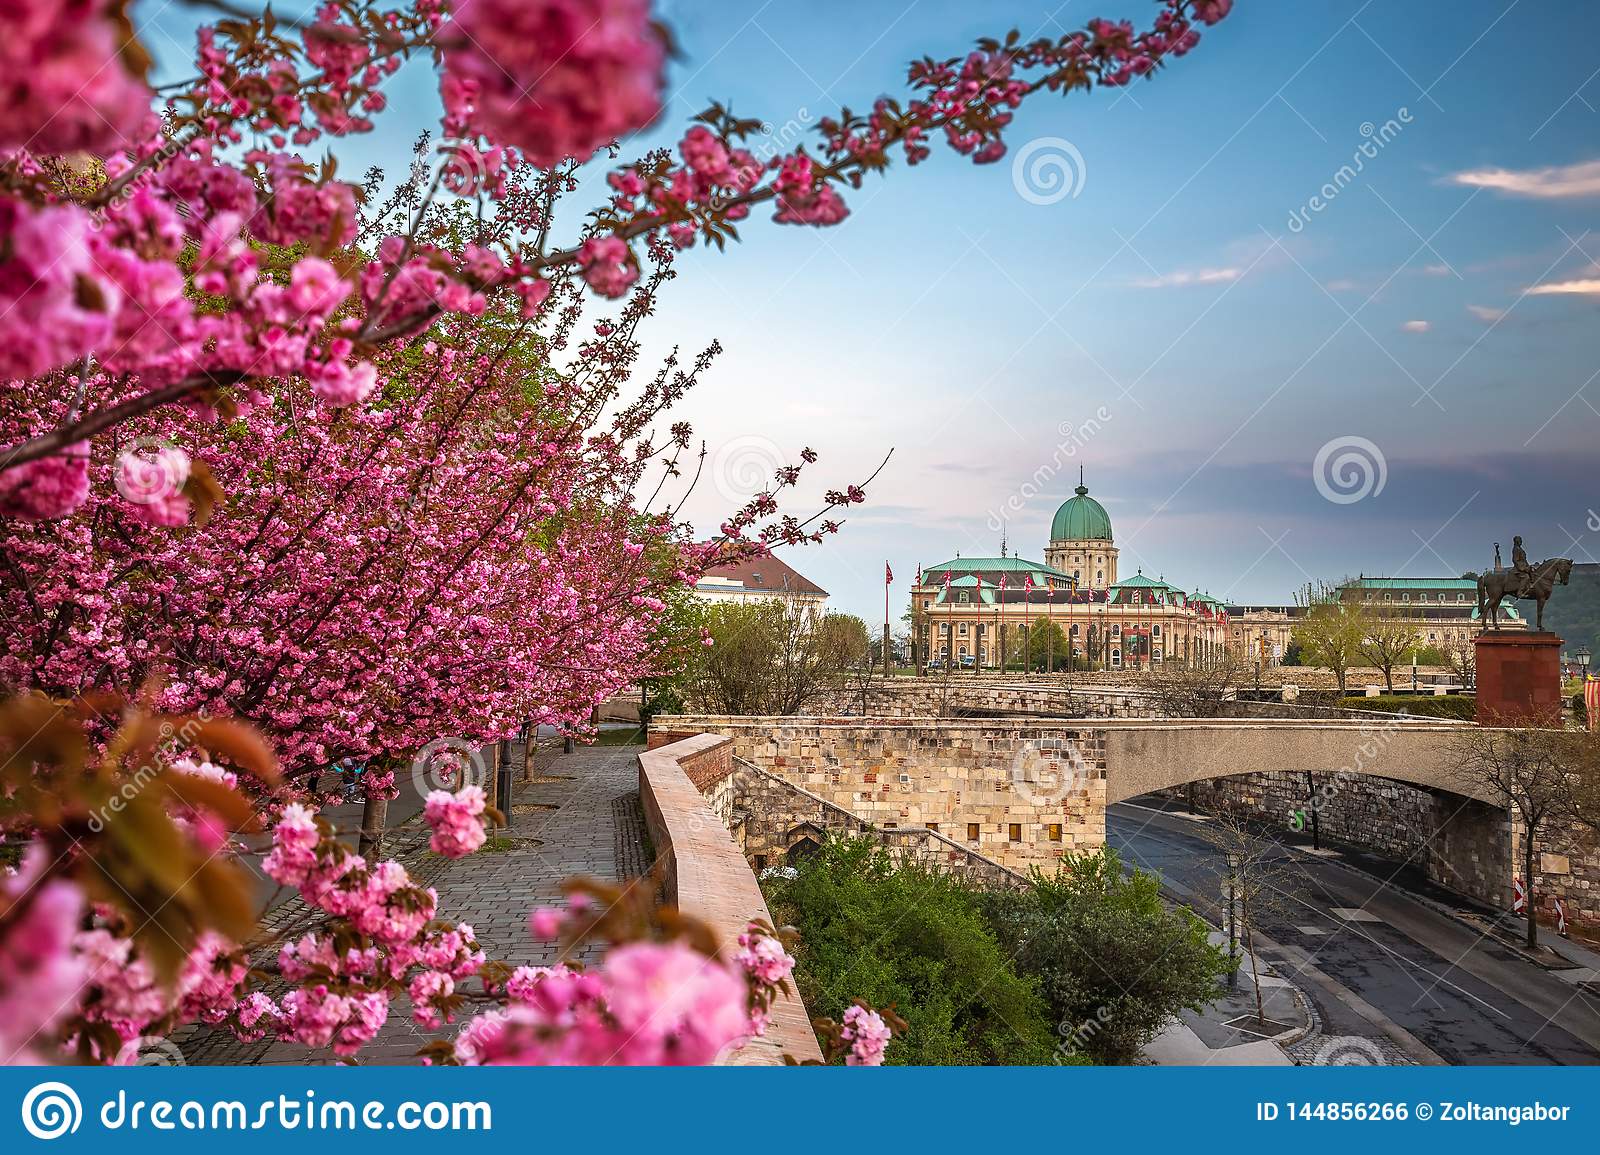 Pink flowers in the Buda castle